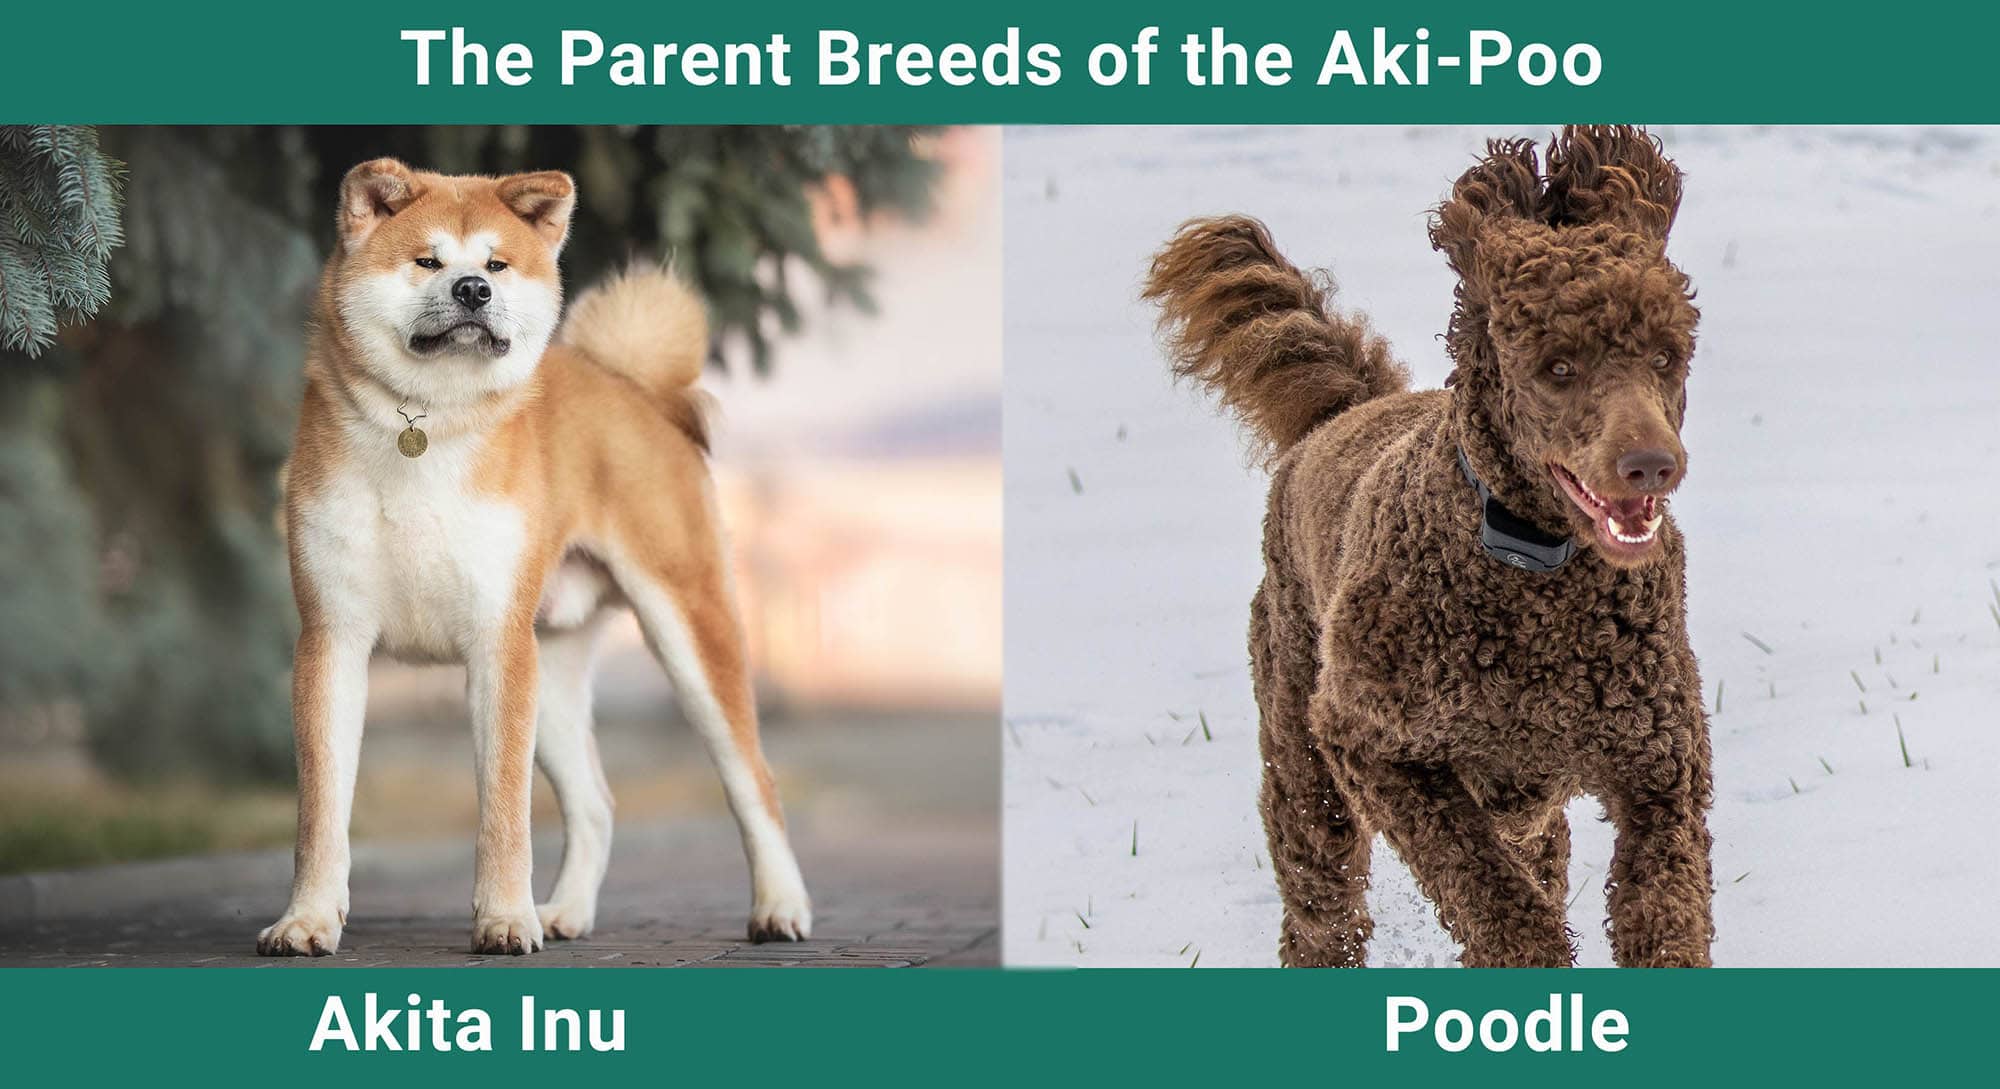 The Parent Breeds of the Aki-Poo